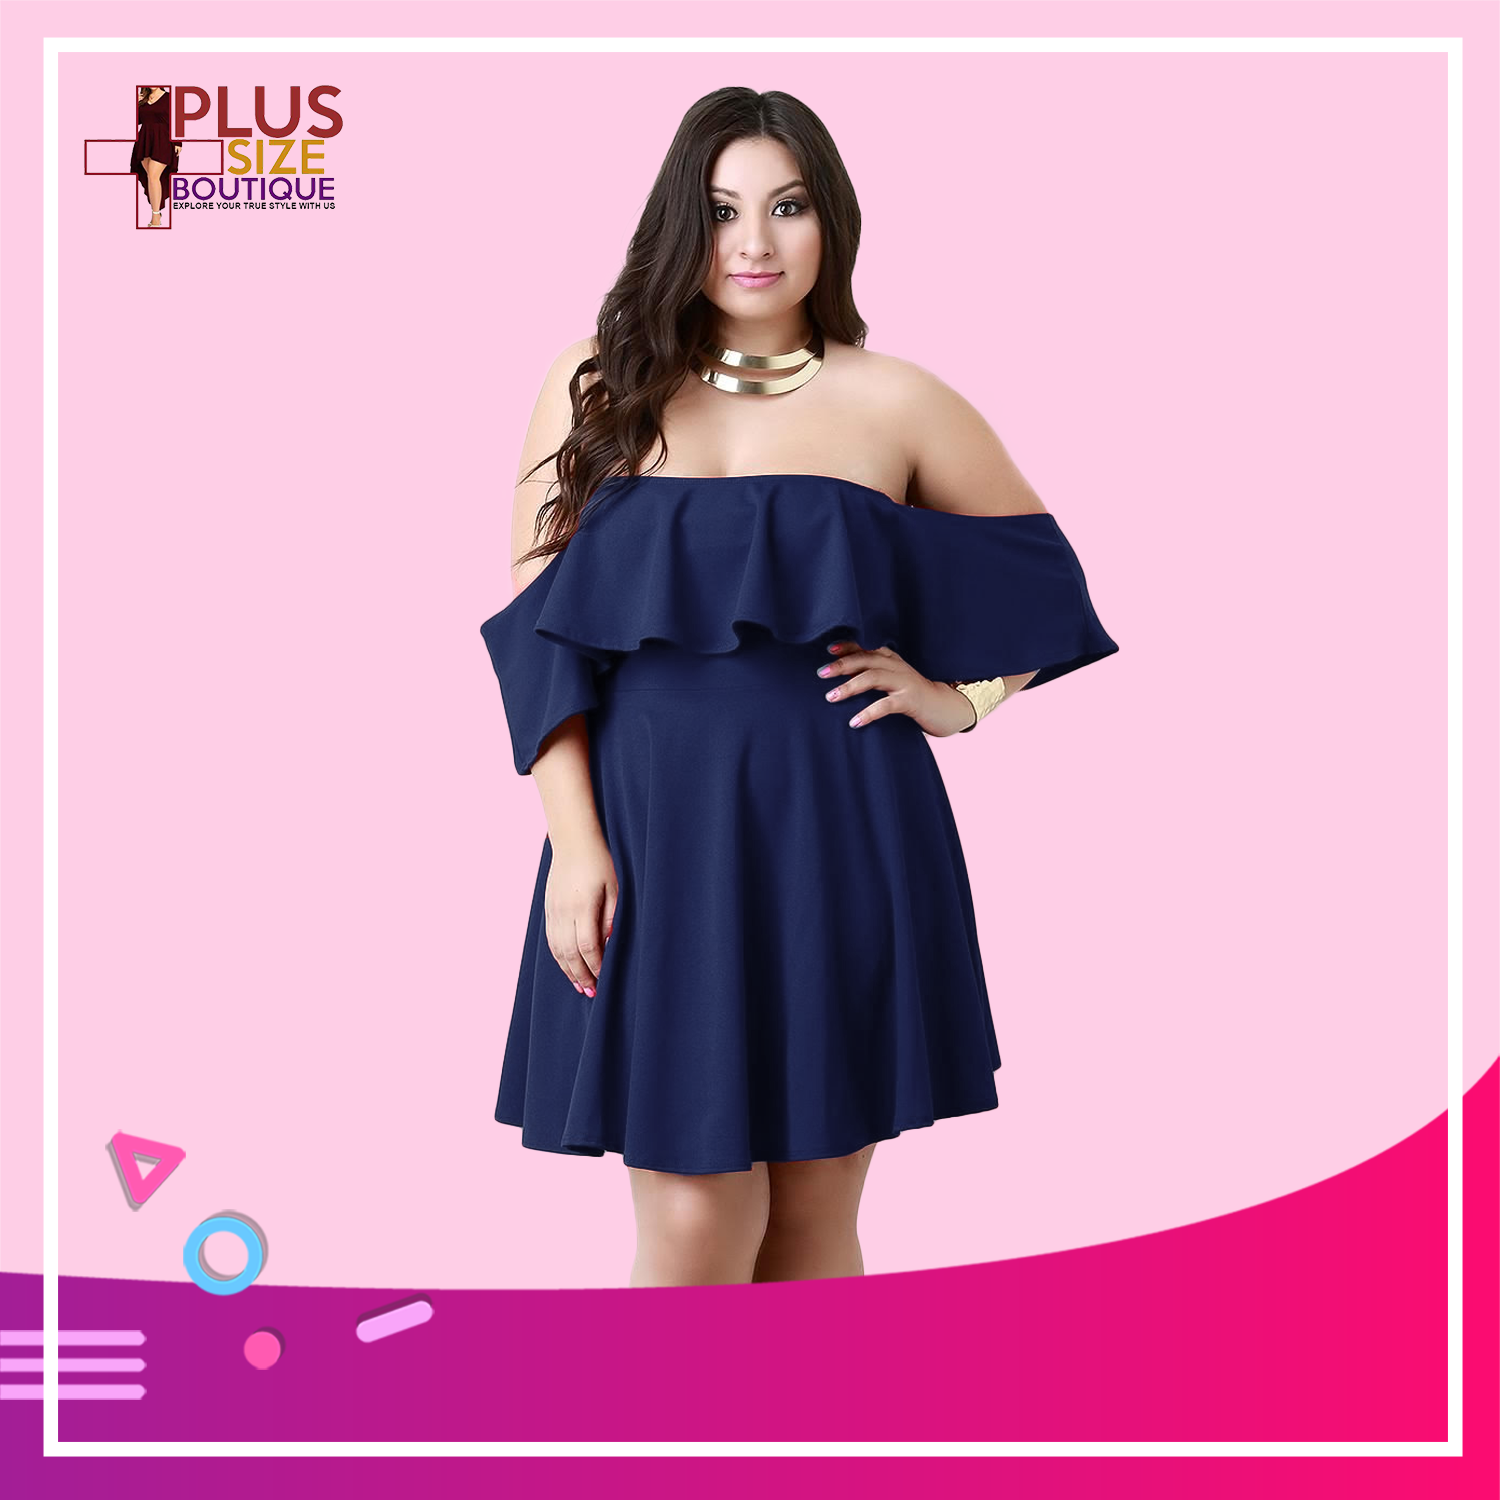 Buy Plus Boutique Top Products at Prices online lazada.com.ph